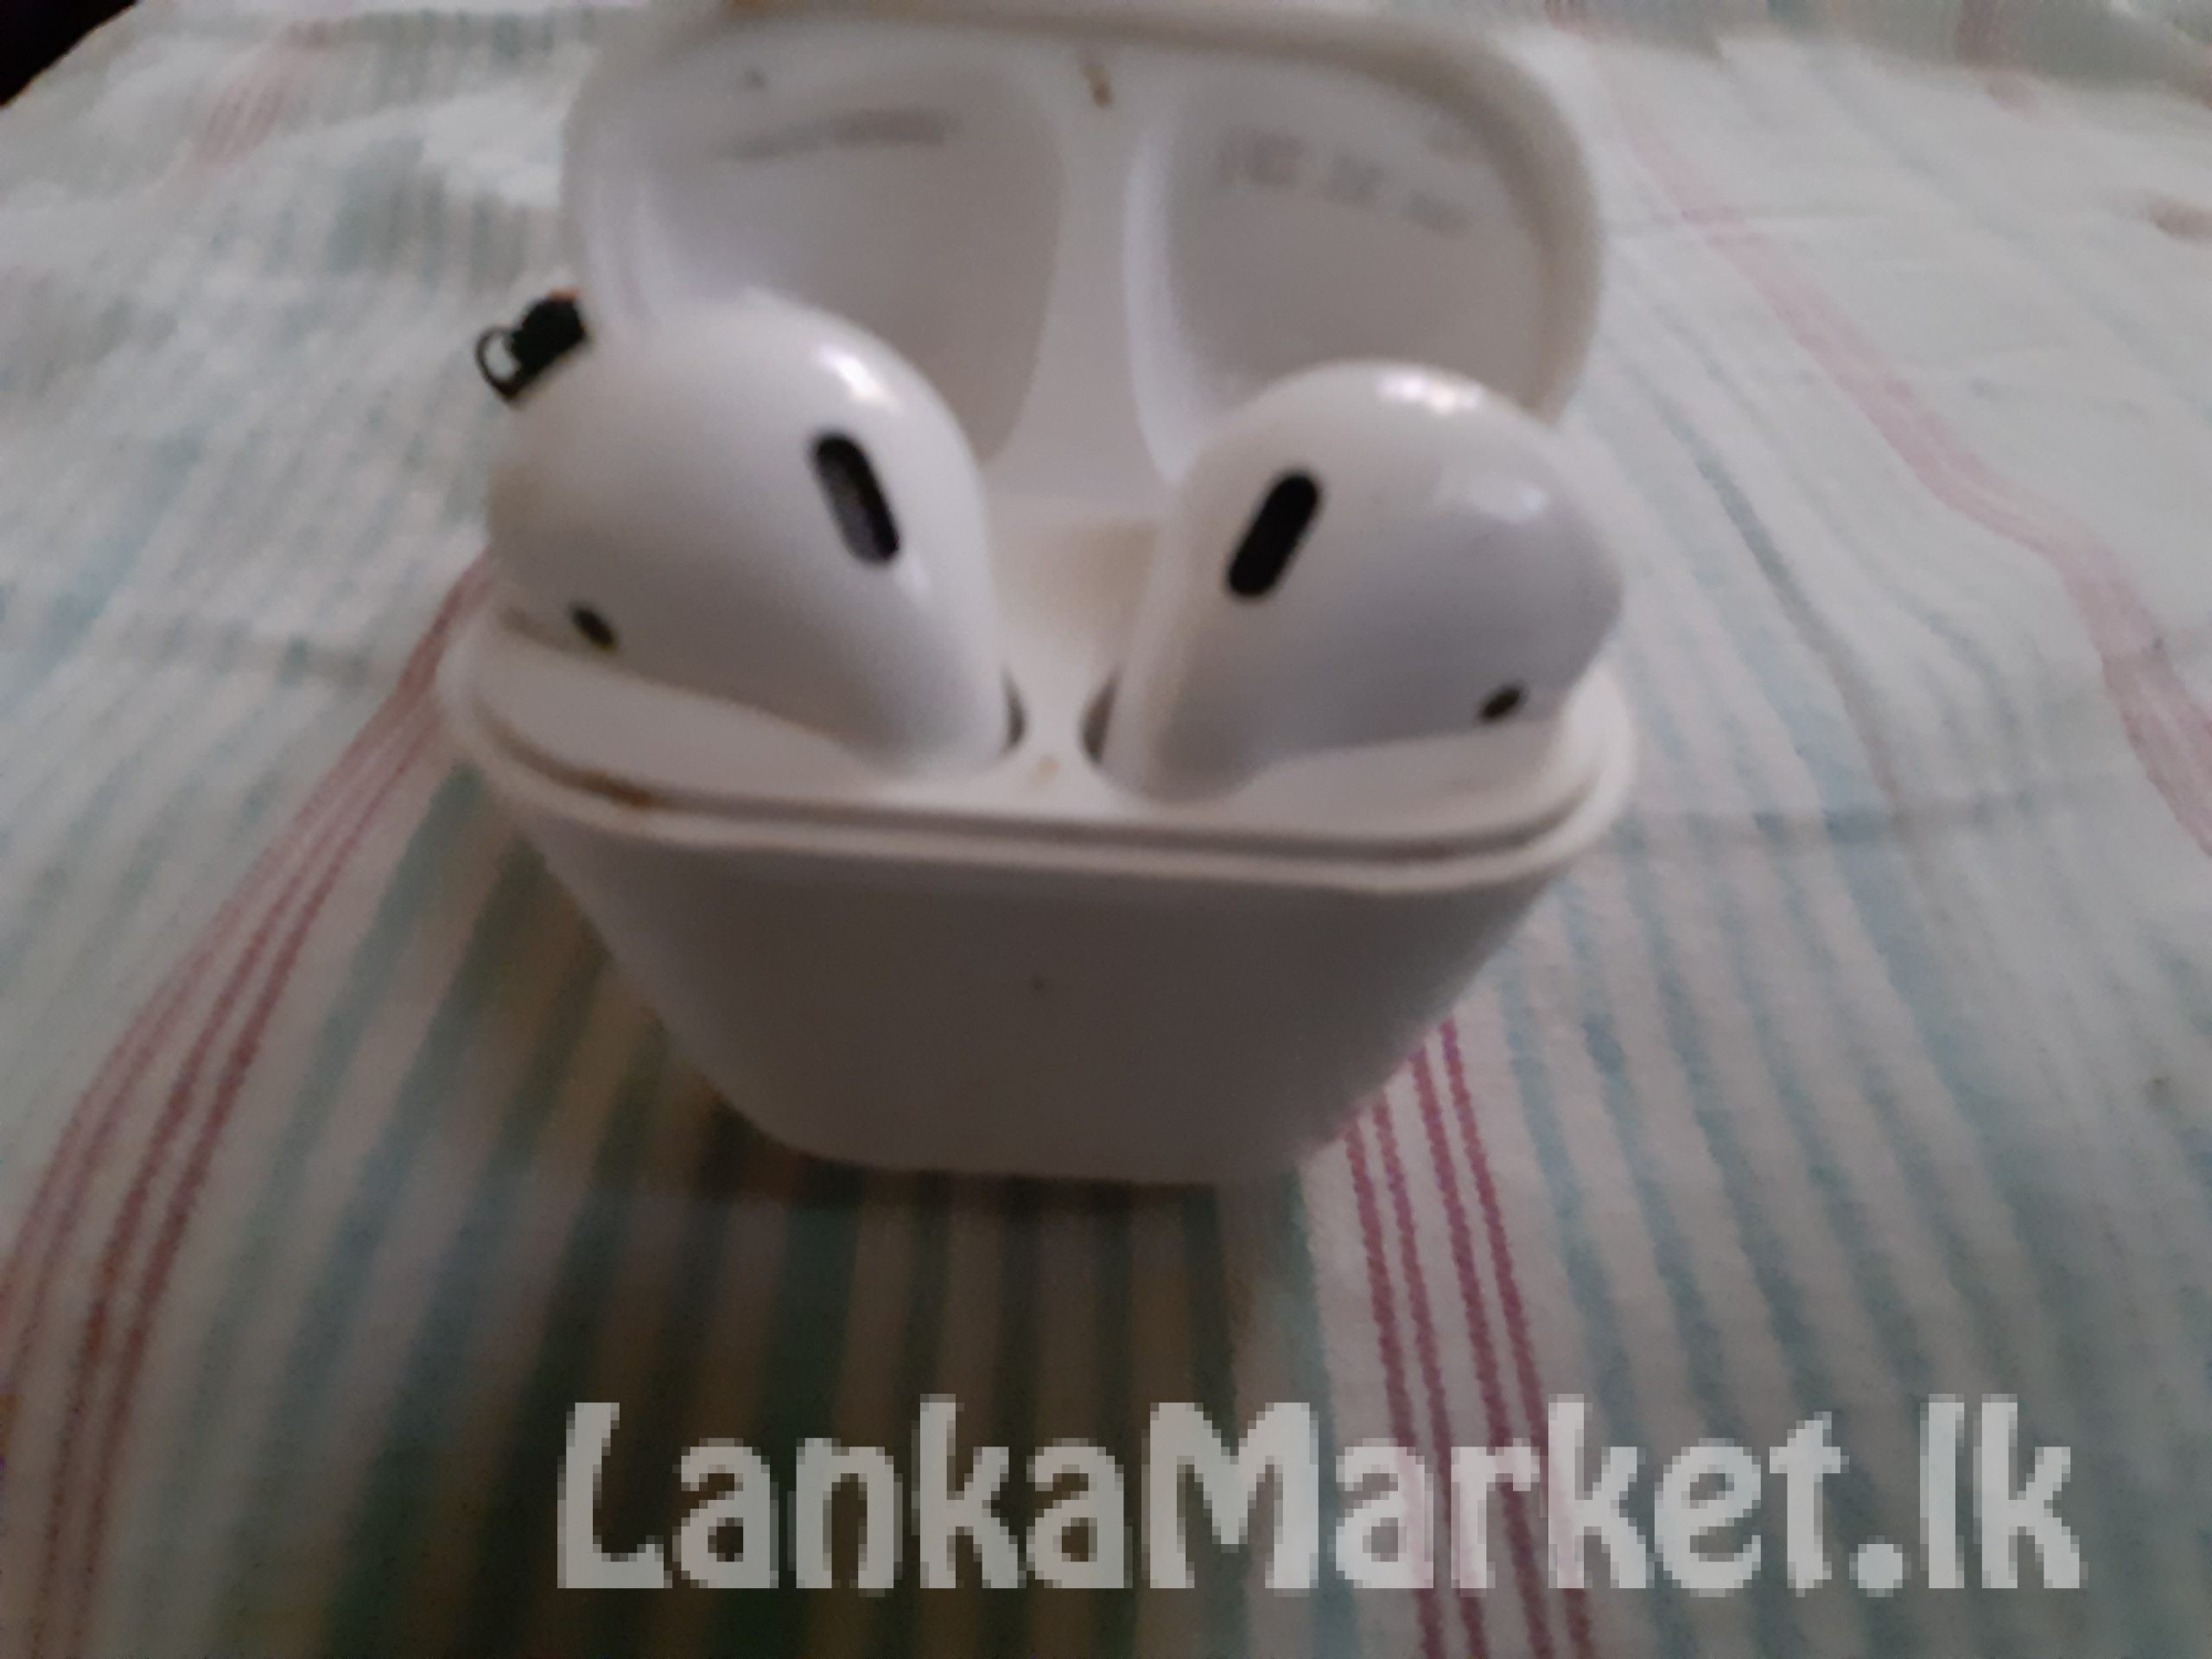 Apple Airpods for sale